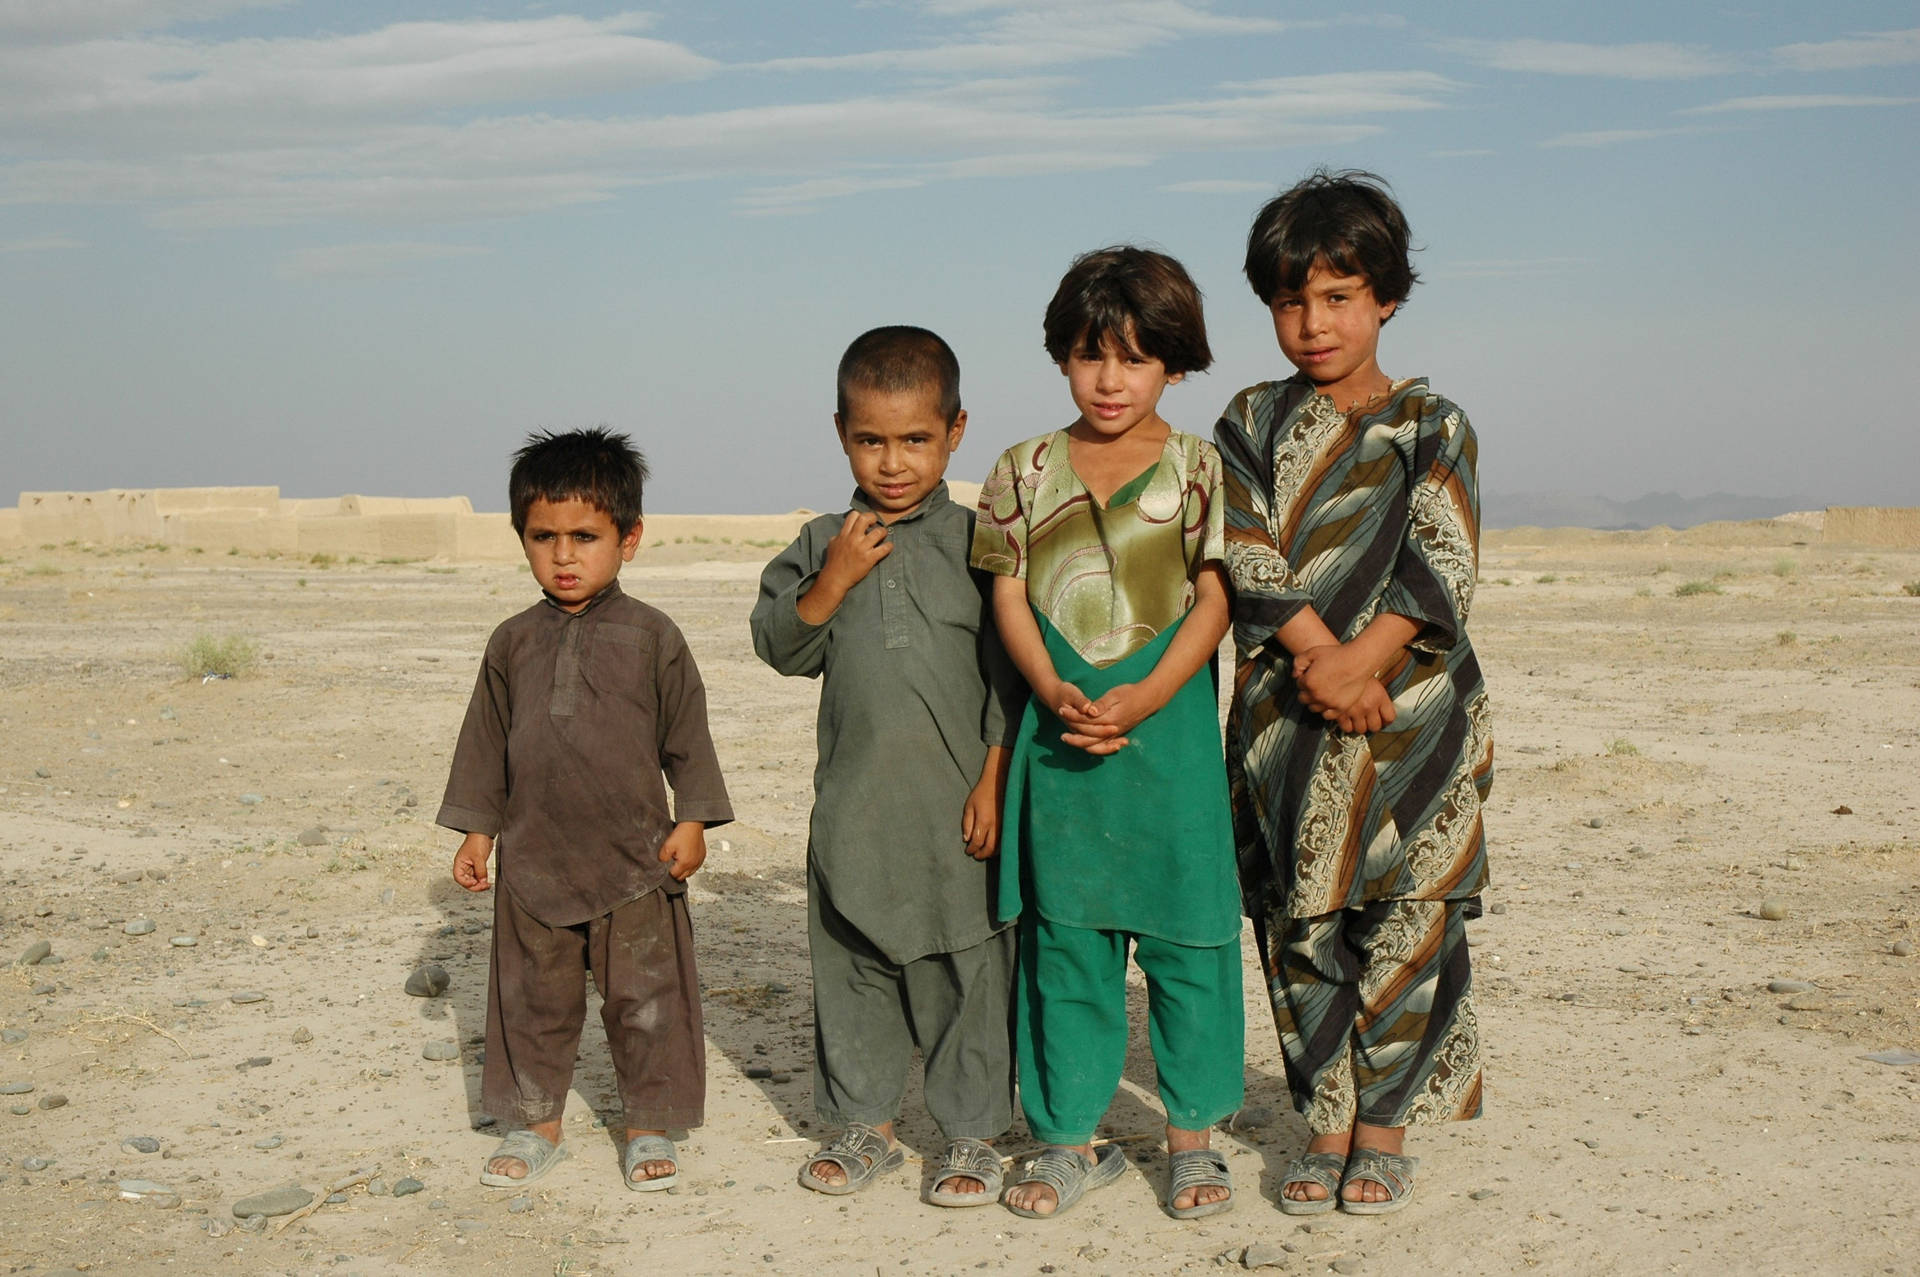 Young Boys In Traditional Attire Observing The Rural Landscapes Of Afghanistan